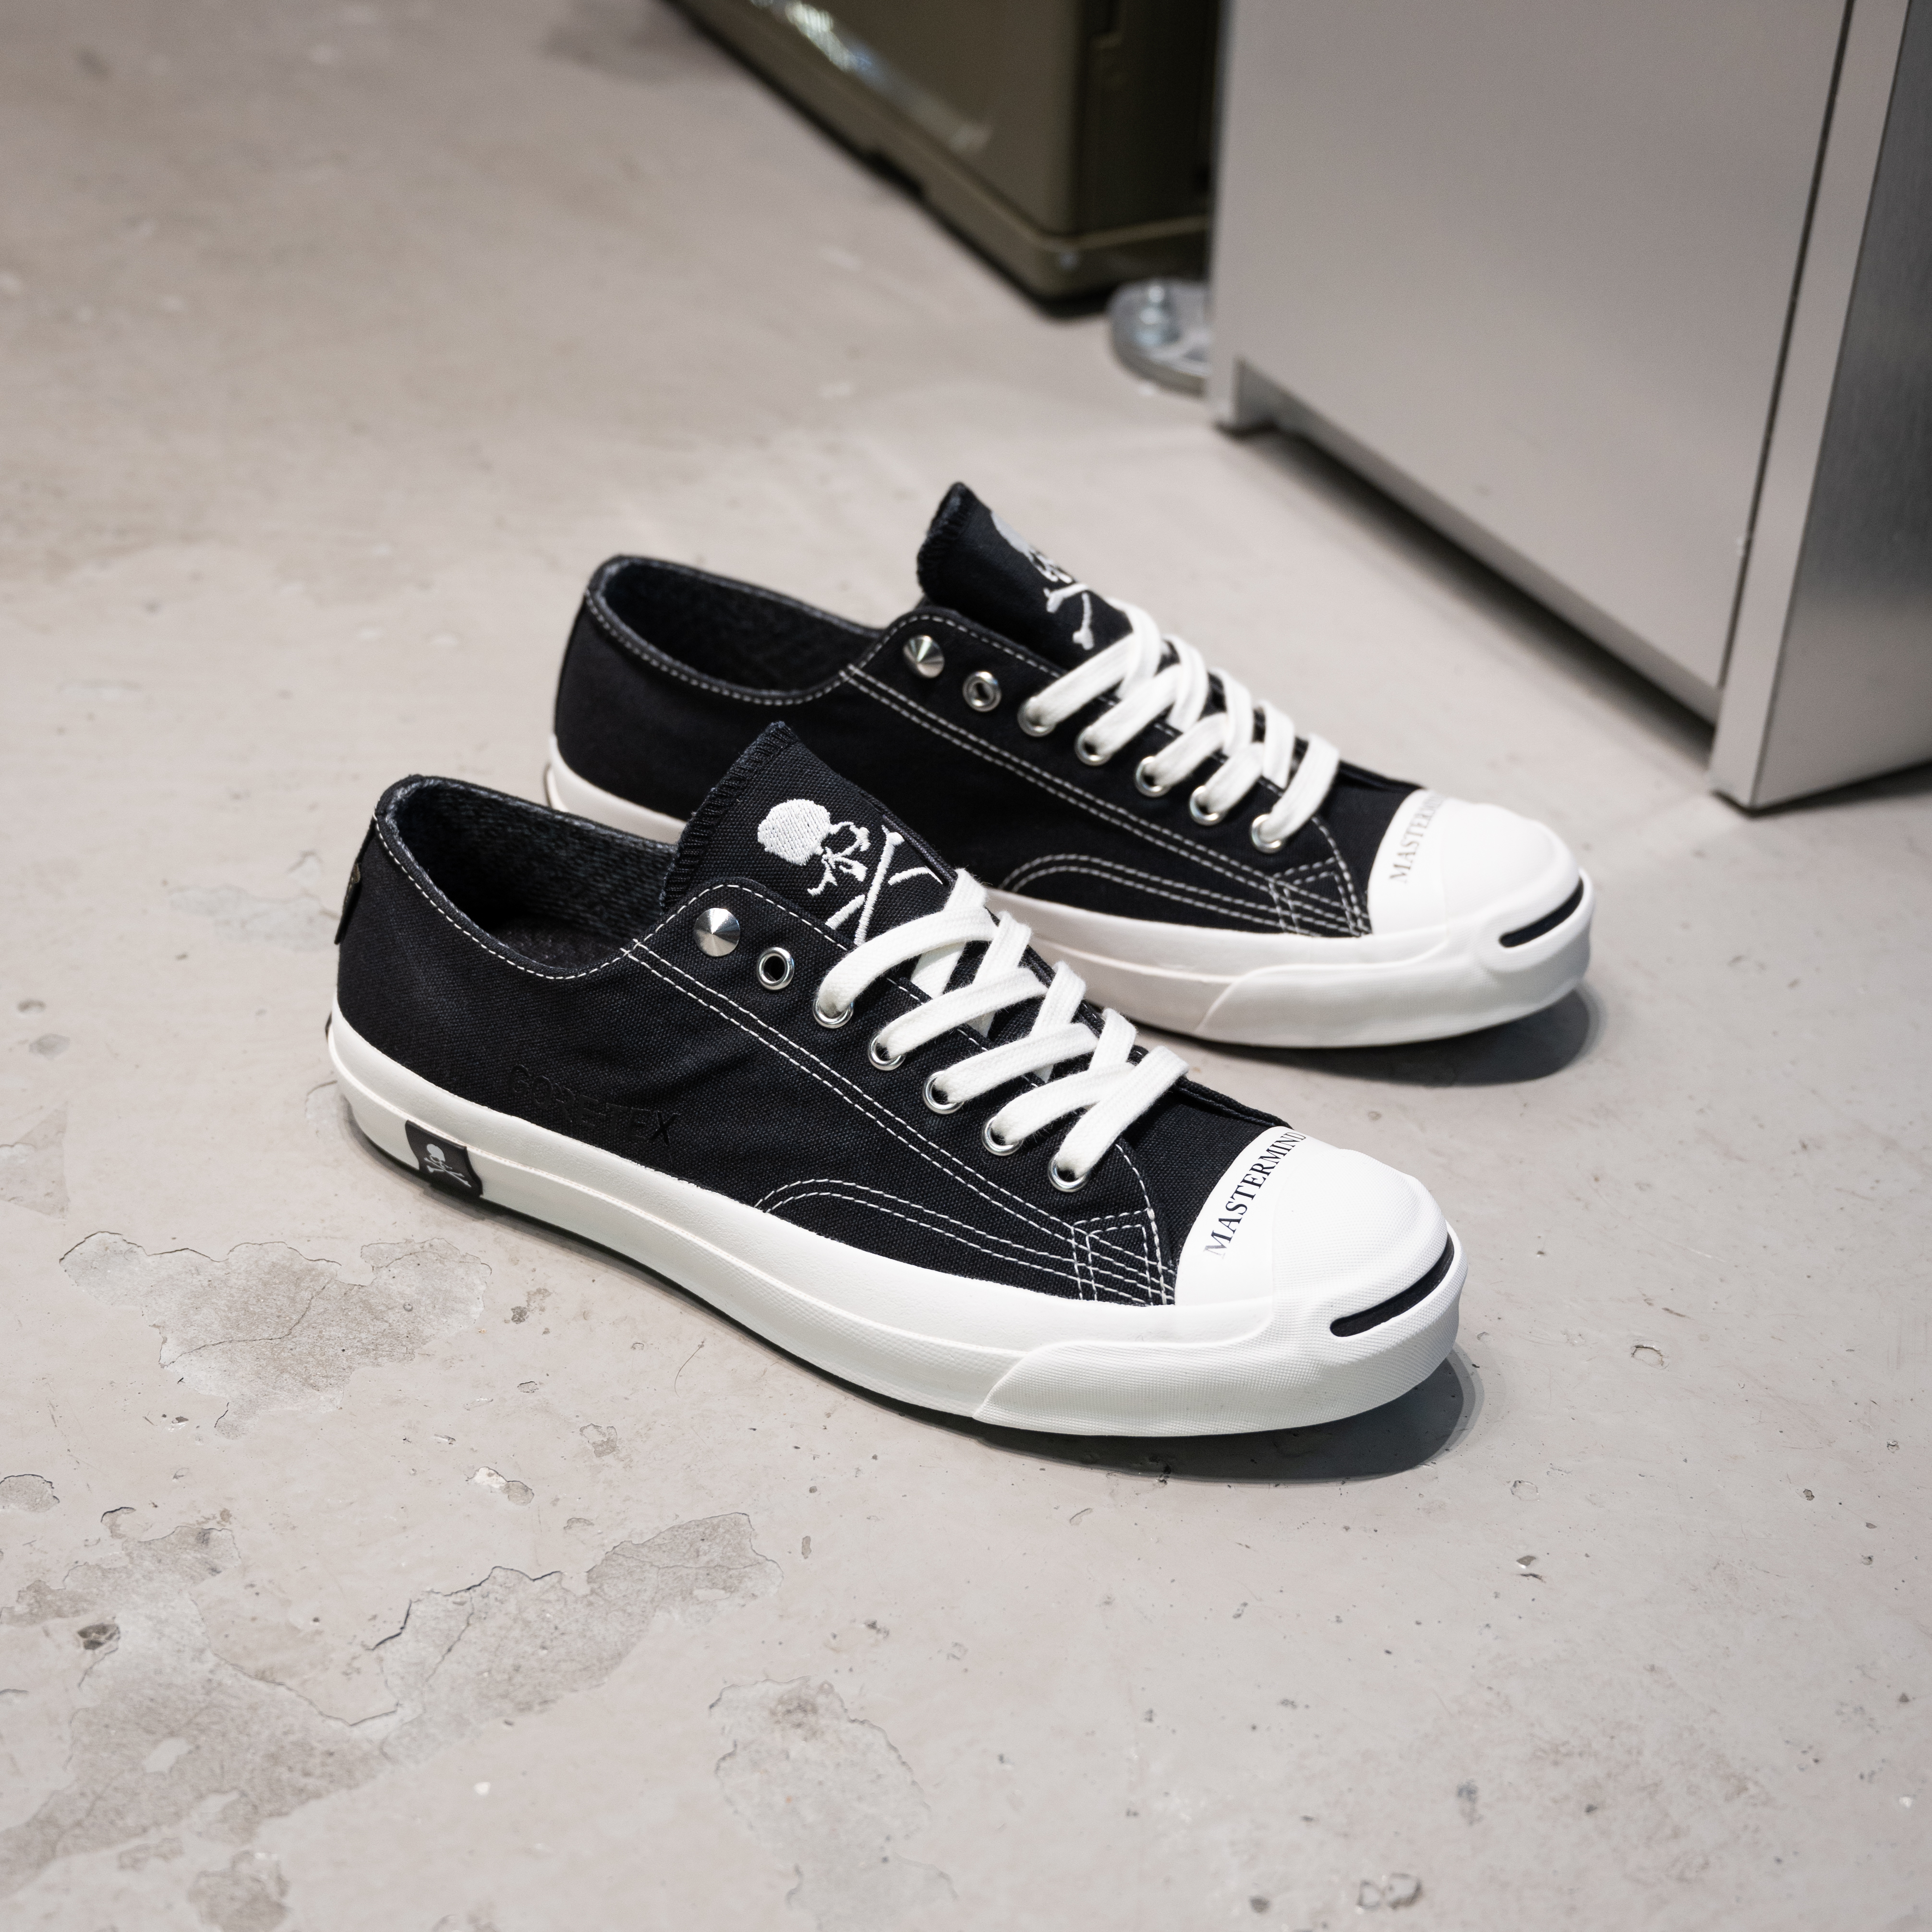 Mastermind Japan x Converse Jack Purcell Gore-Tex LOW